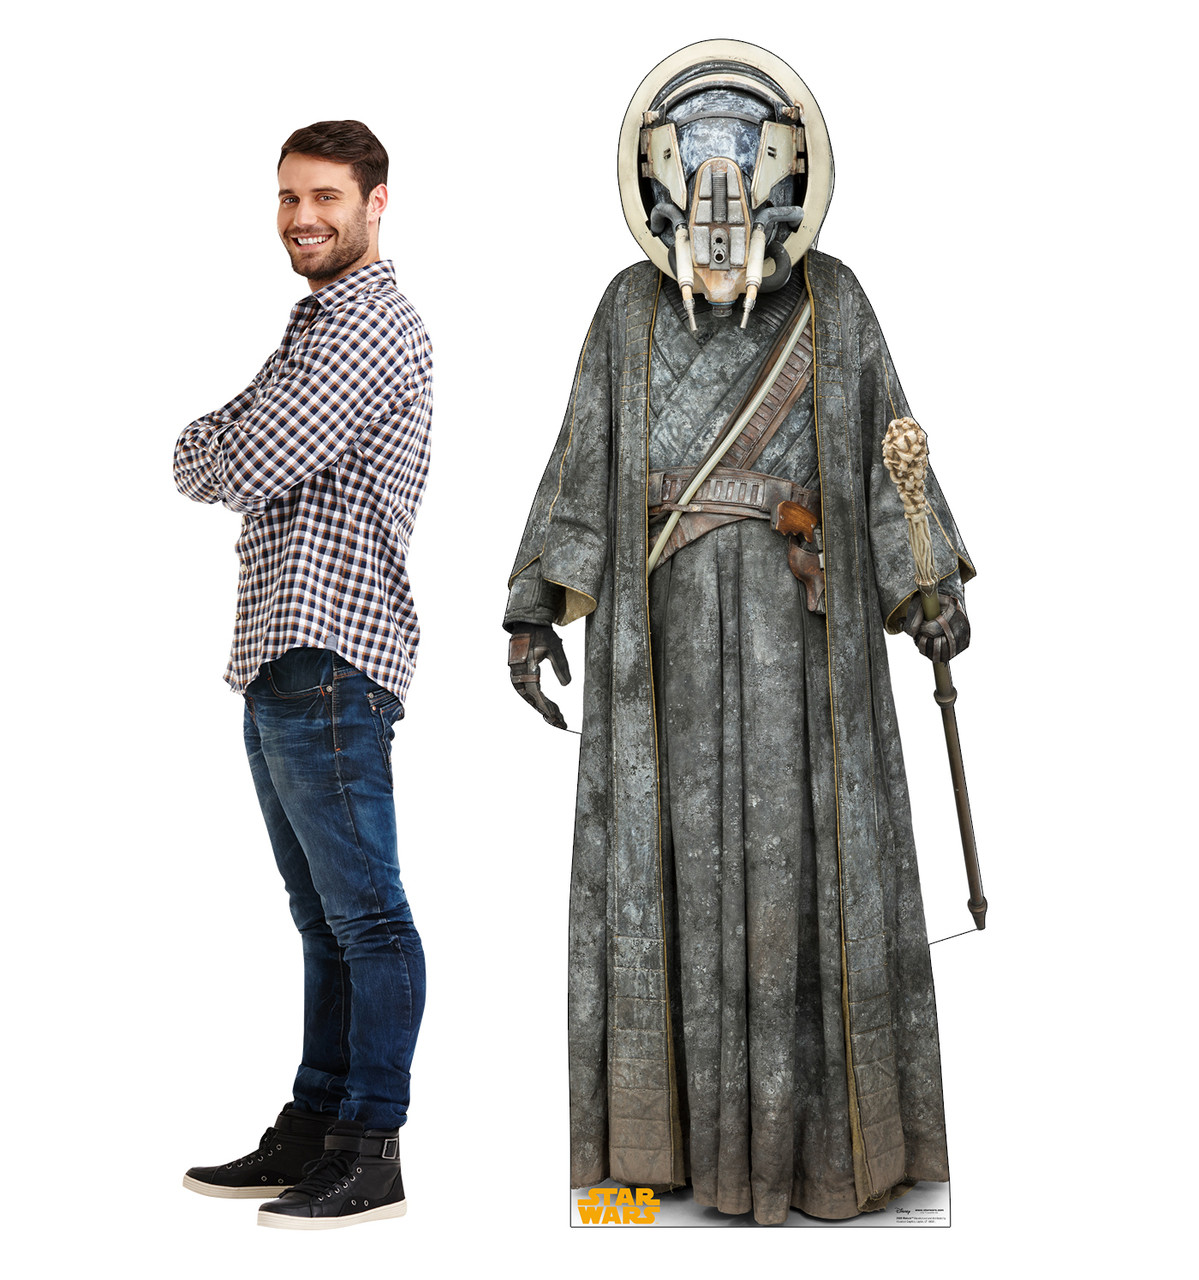 Moloch™ Life-size cardboard standee with model.